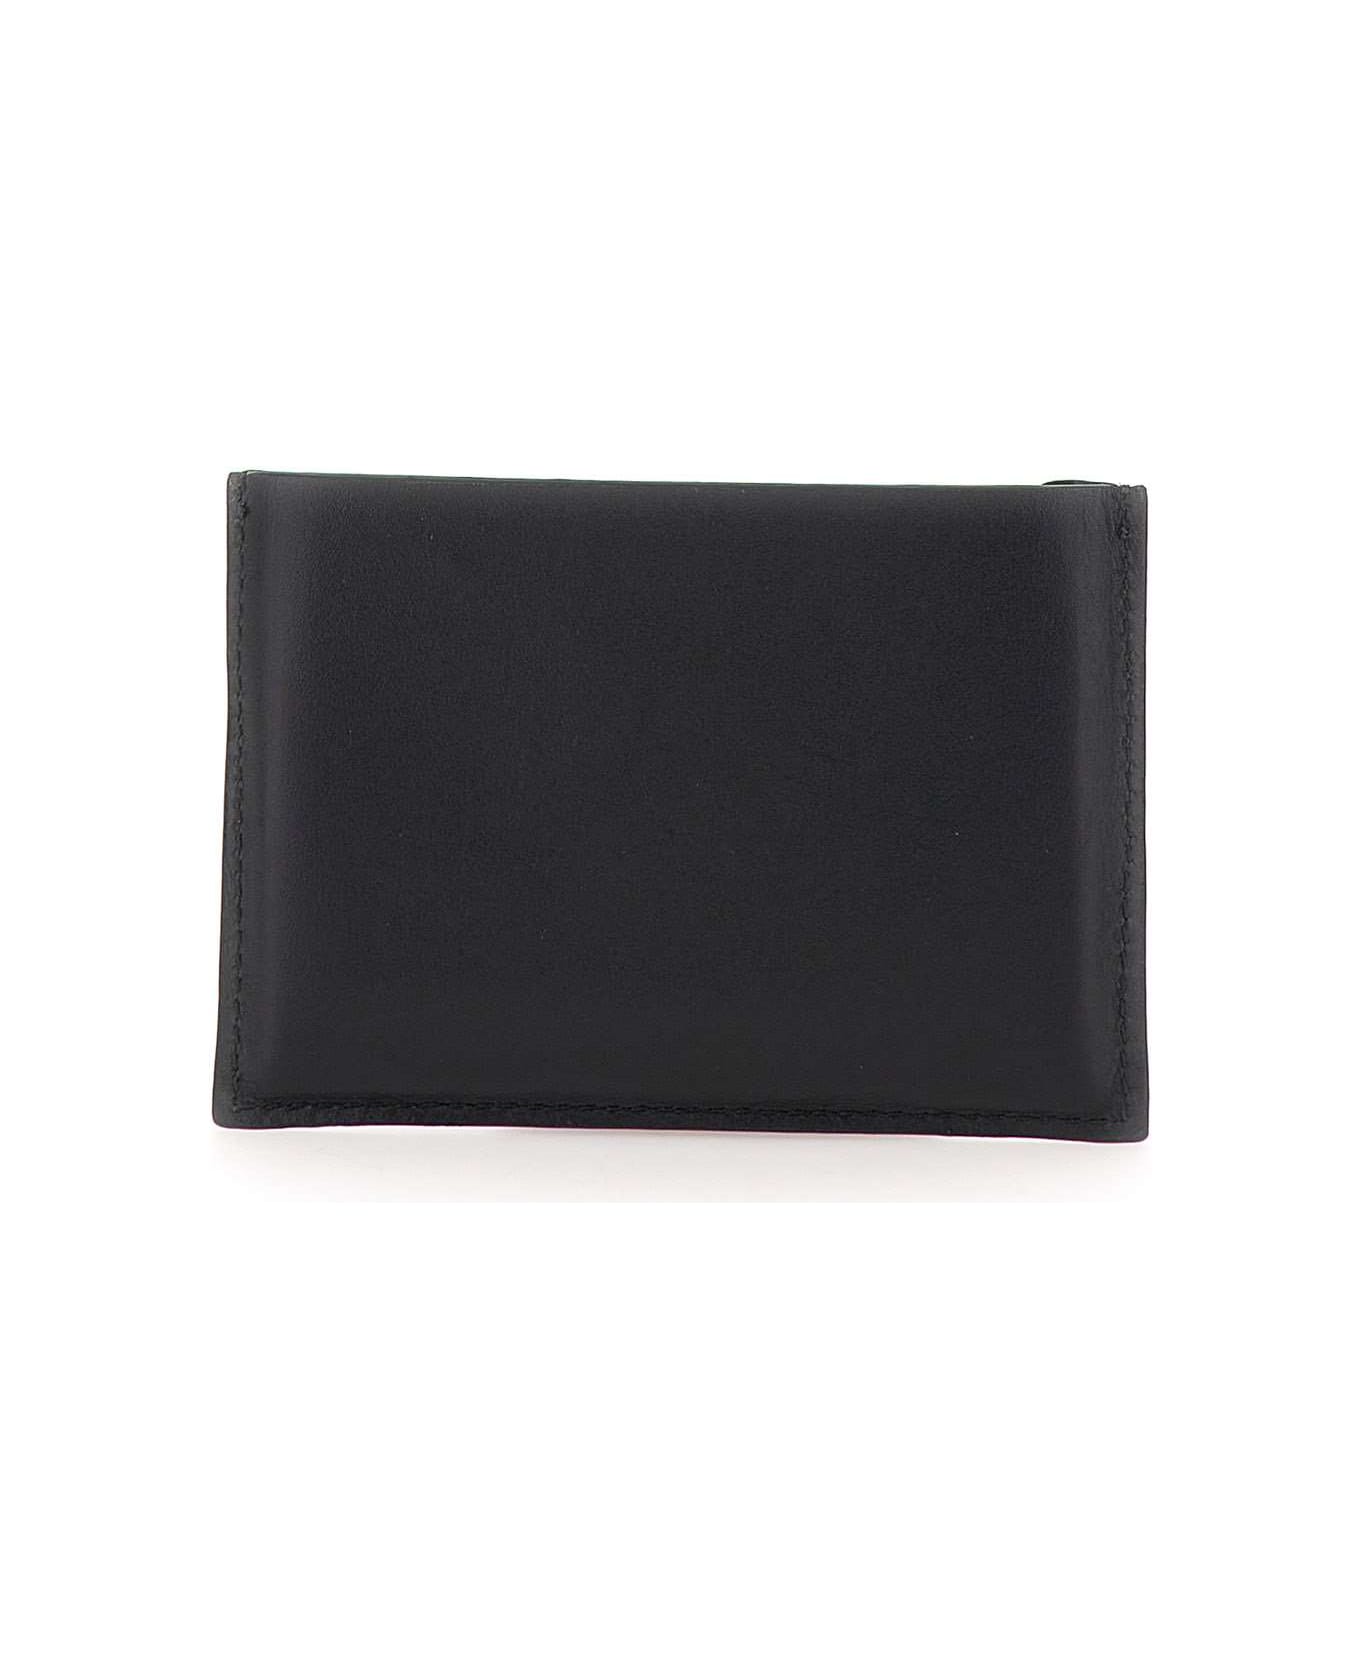 Paul Smith Card Holder Leather Wallet - BLACK